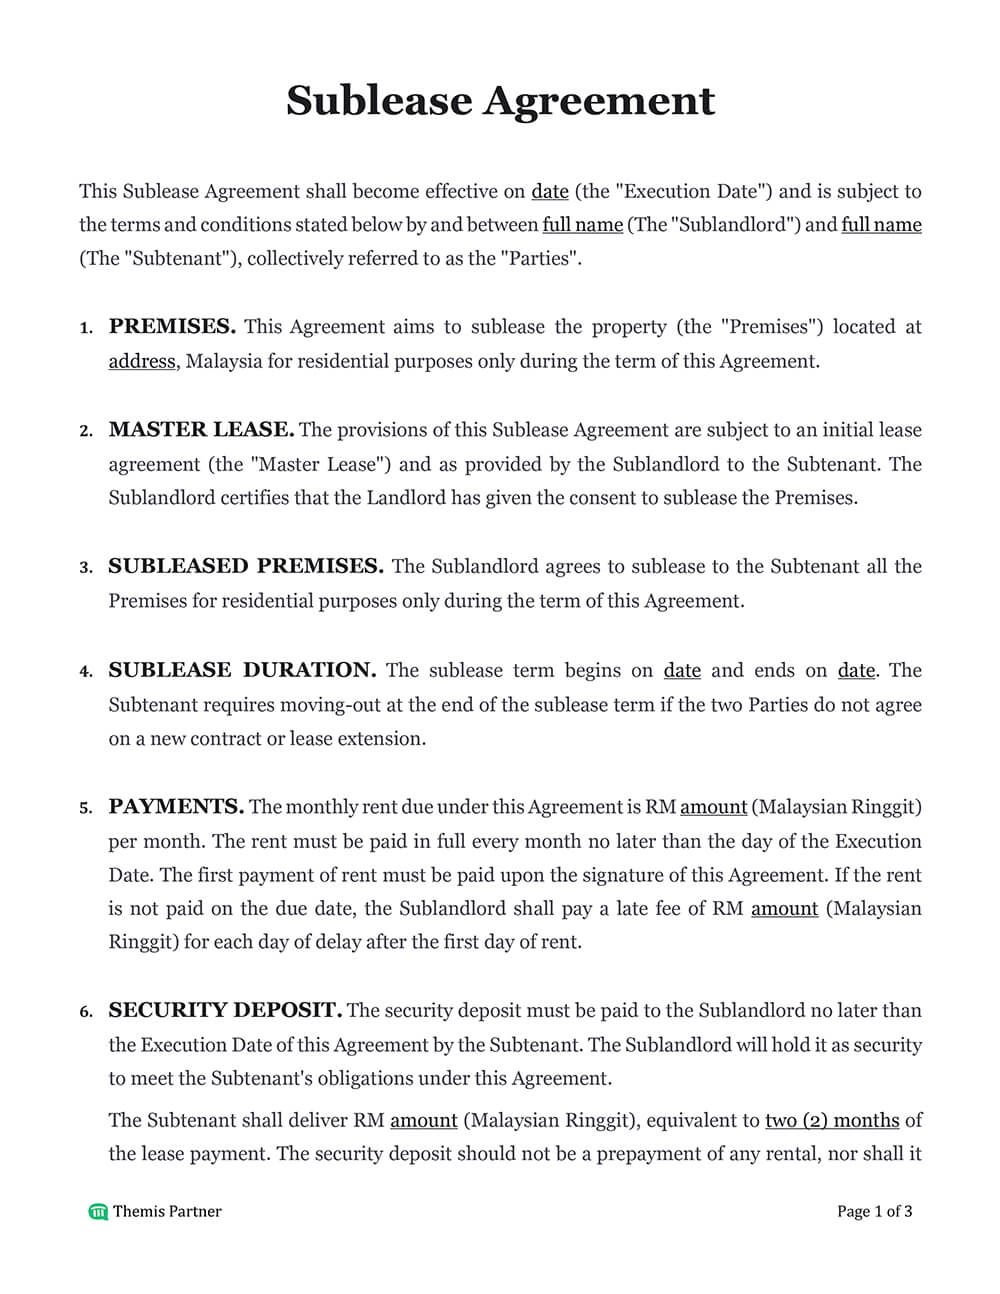 Sublease agreement template